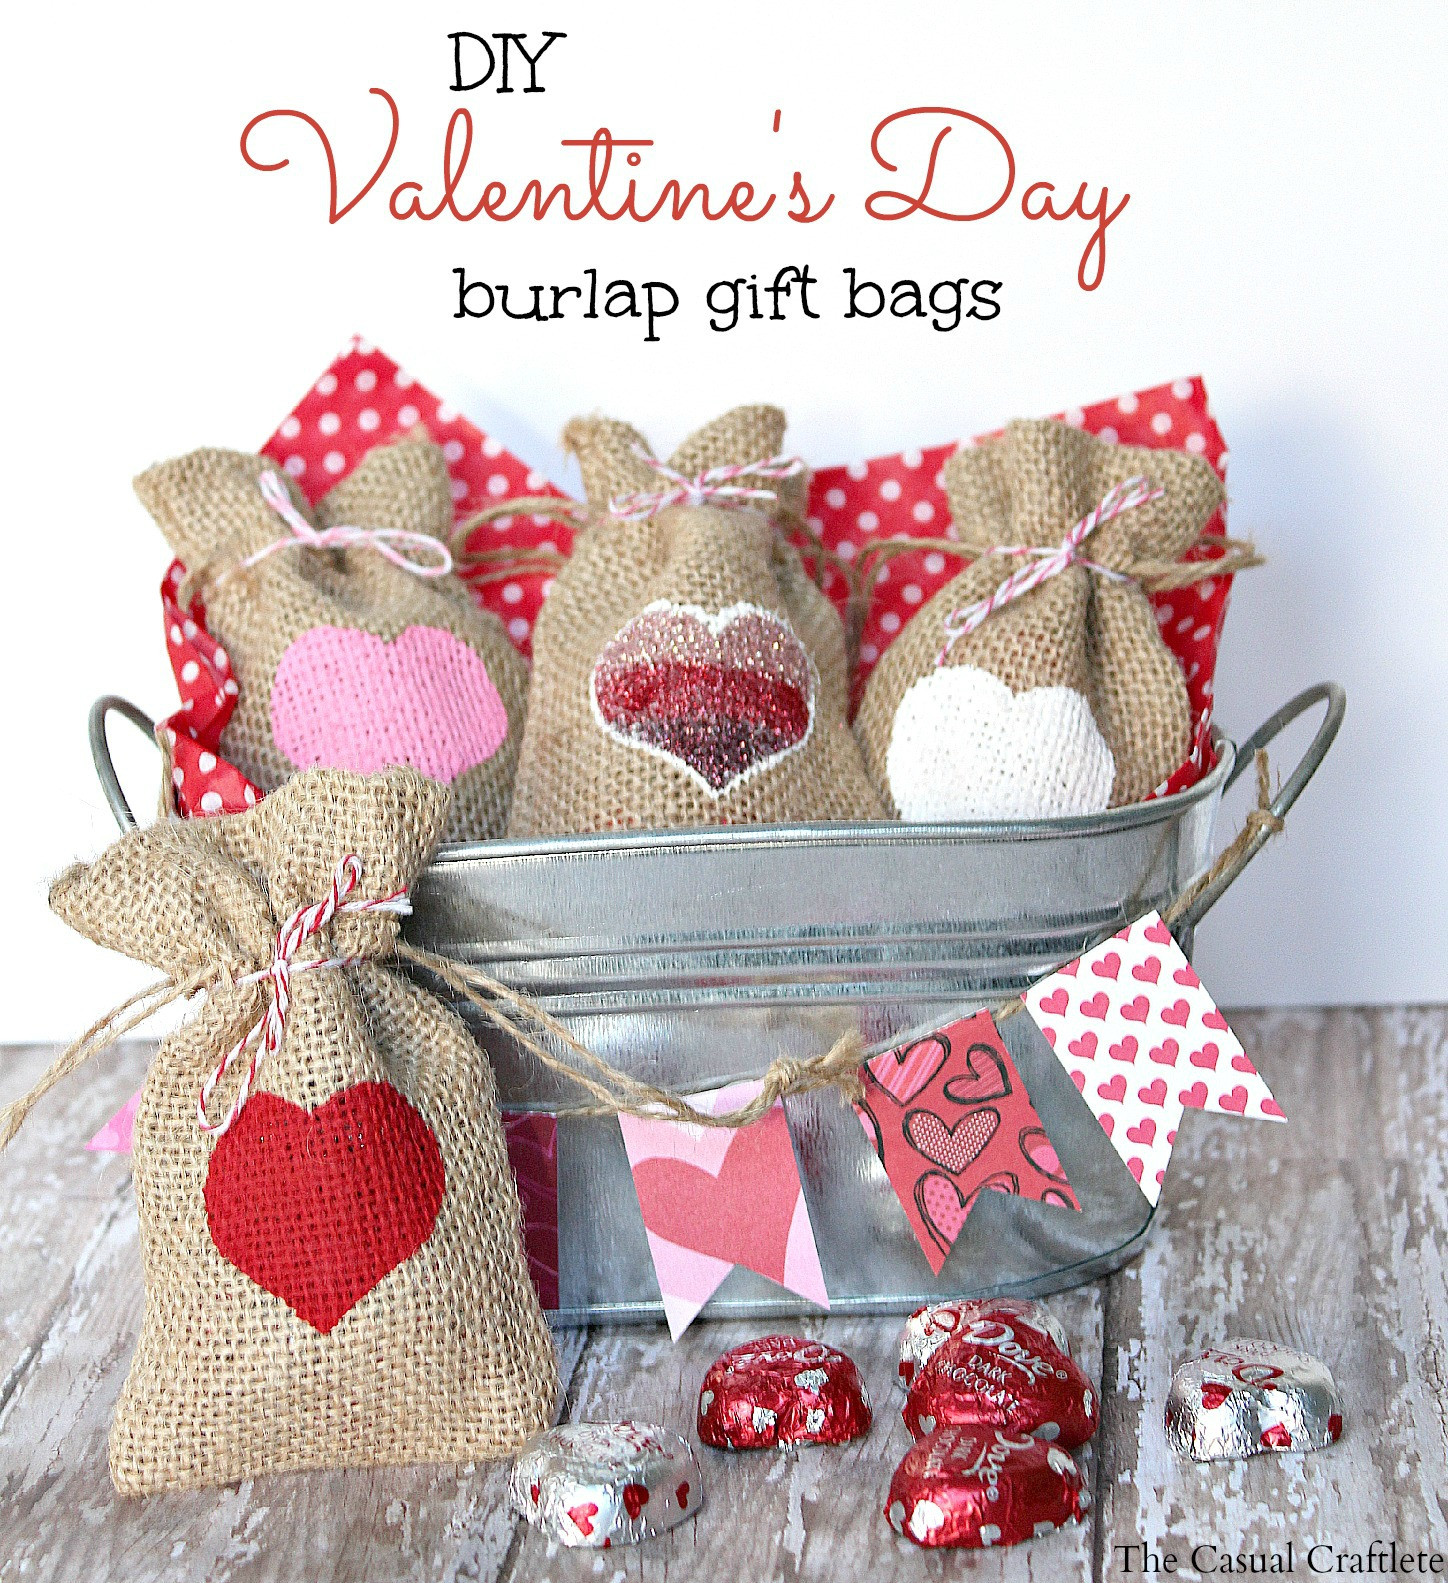 Homemade Valentines Day Gifts Best Of Diy Valentine S Day Burlap Gift Bags